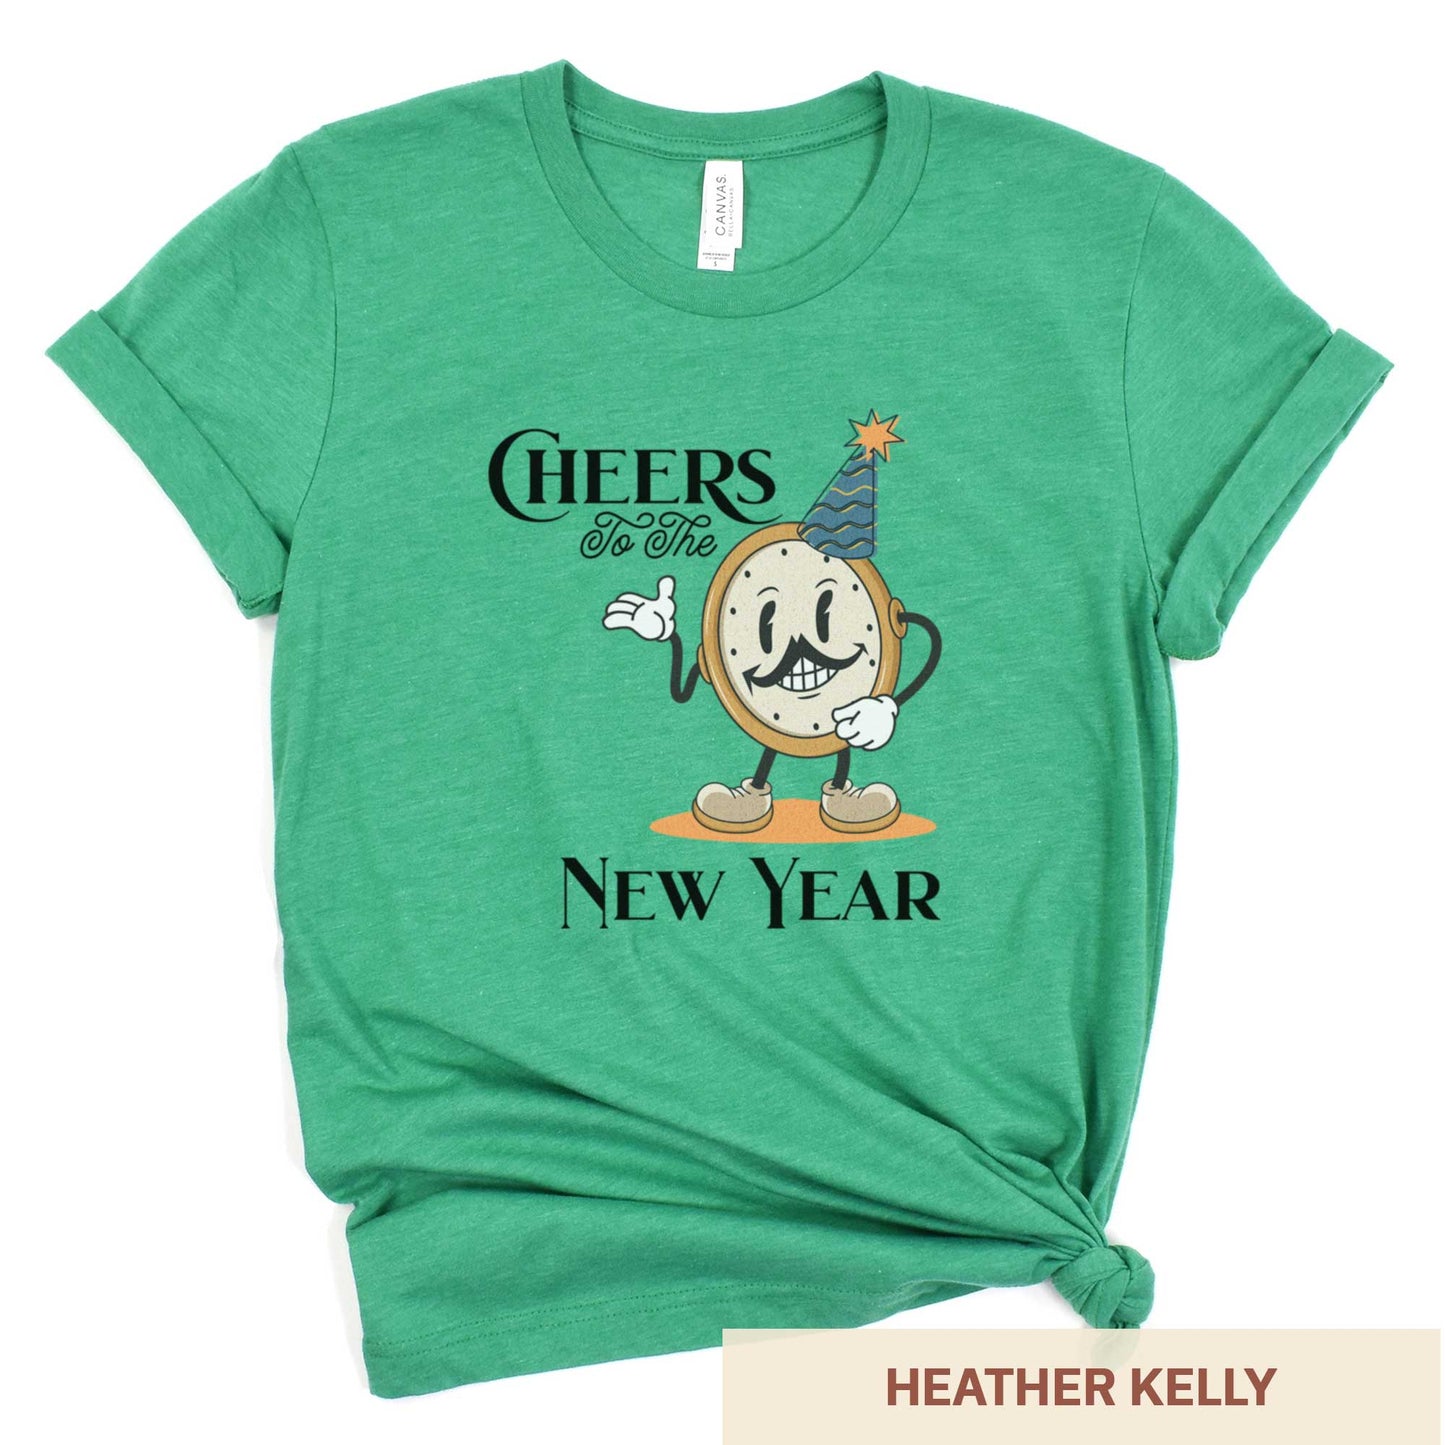 A heather kelly Bella Canvas t-shirt featuring a retro looking clock cartoon with a party hat next to the words Cheers to the New Year.